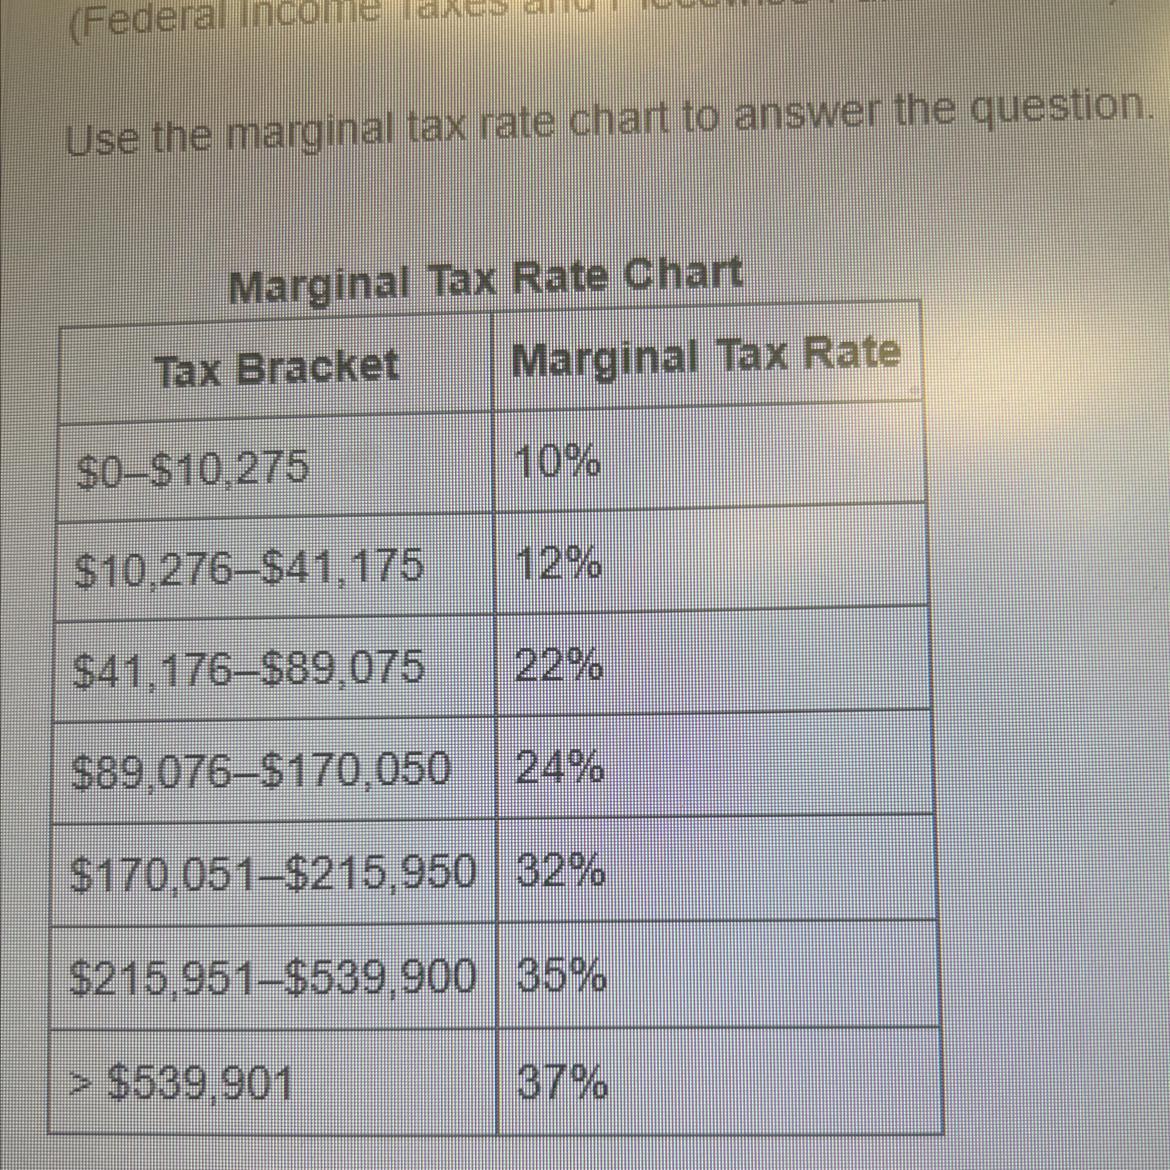 Determine The Effective Tax Rate For A Taxable Income Of $115,500. Round Theginal Answer To The Nearest